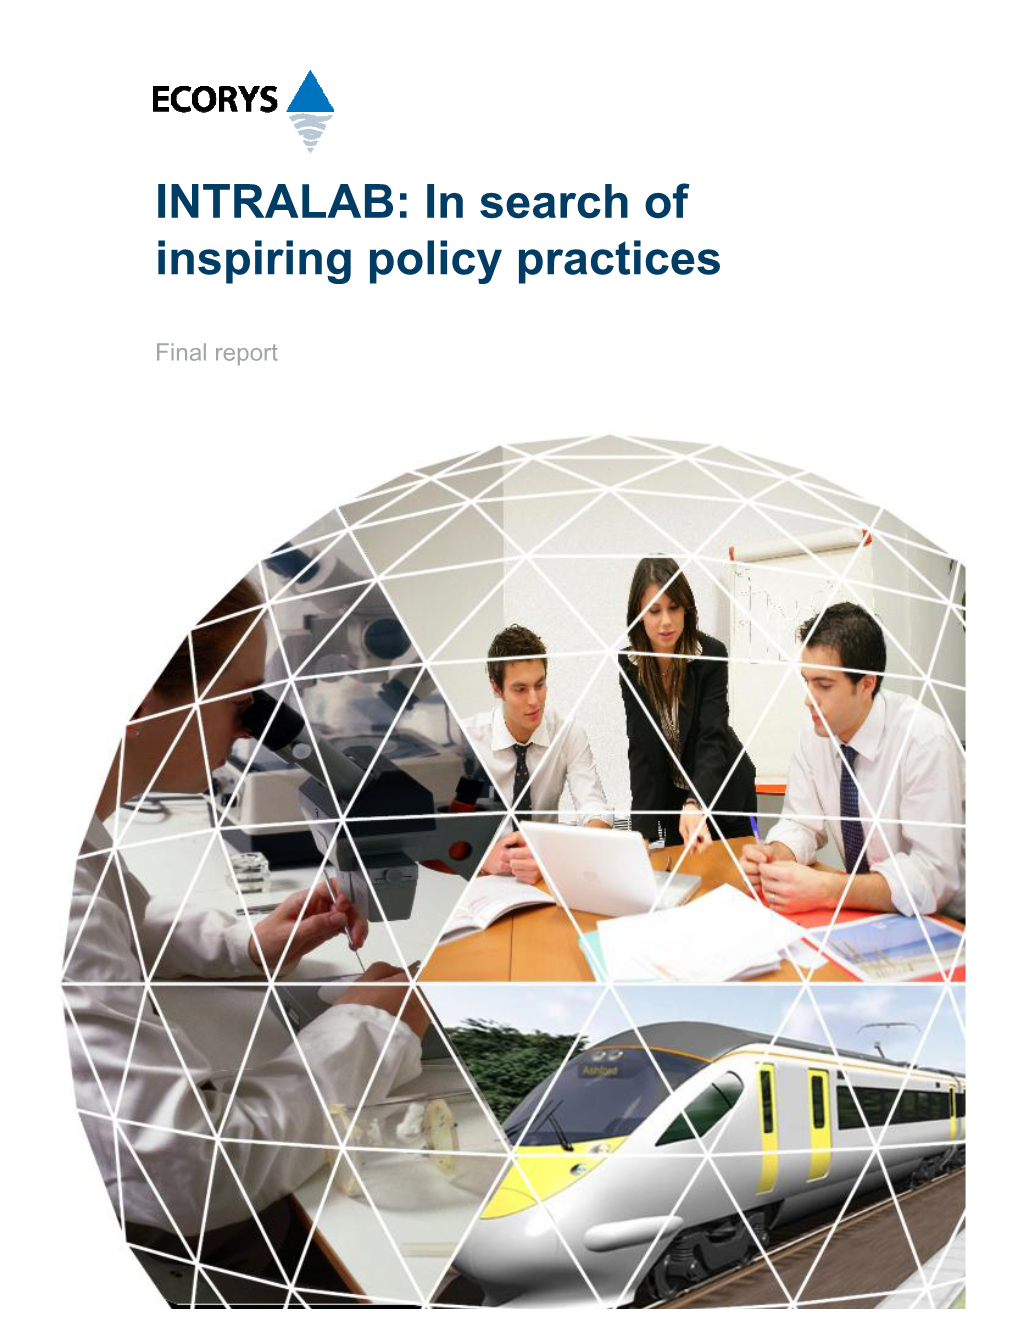 INTRALAB: in Search of Inspiring Policy Practices